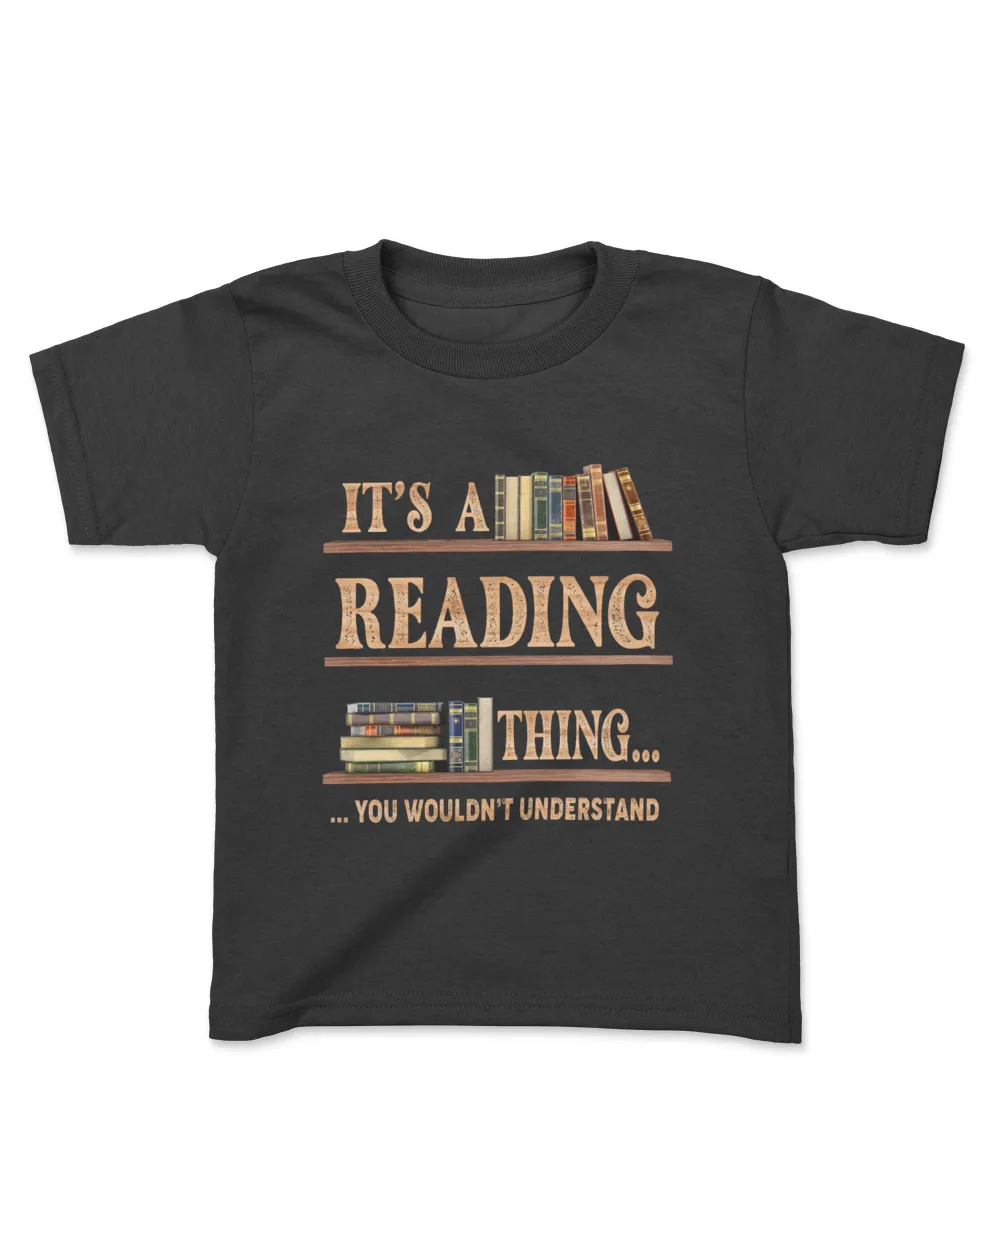 Reading Thing